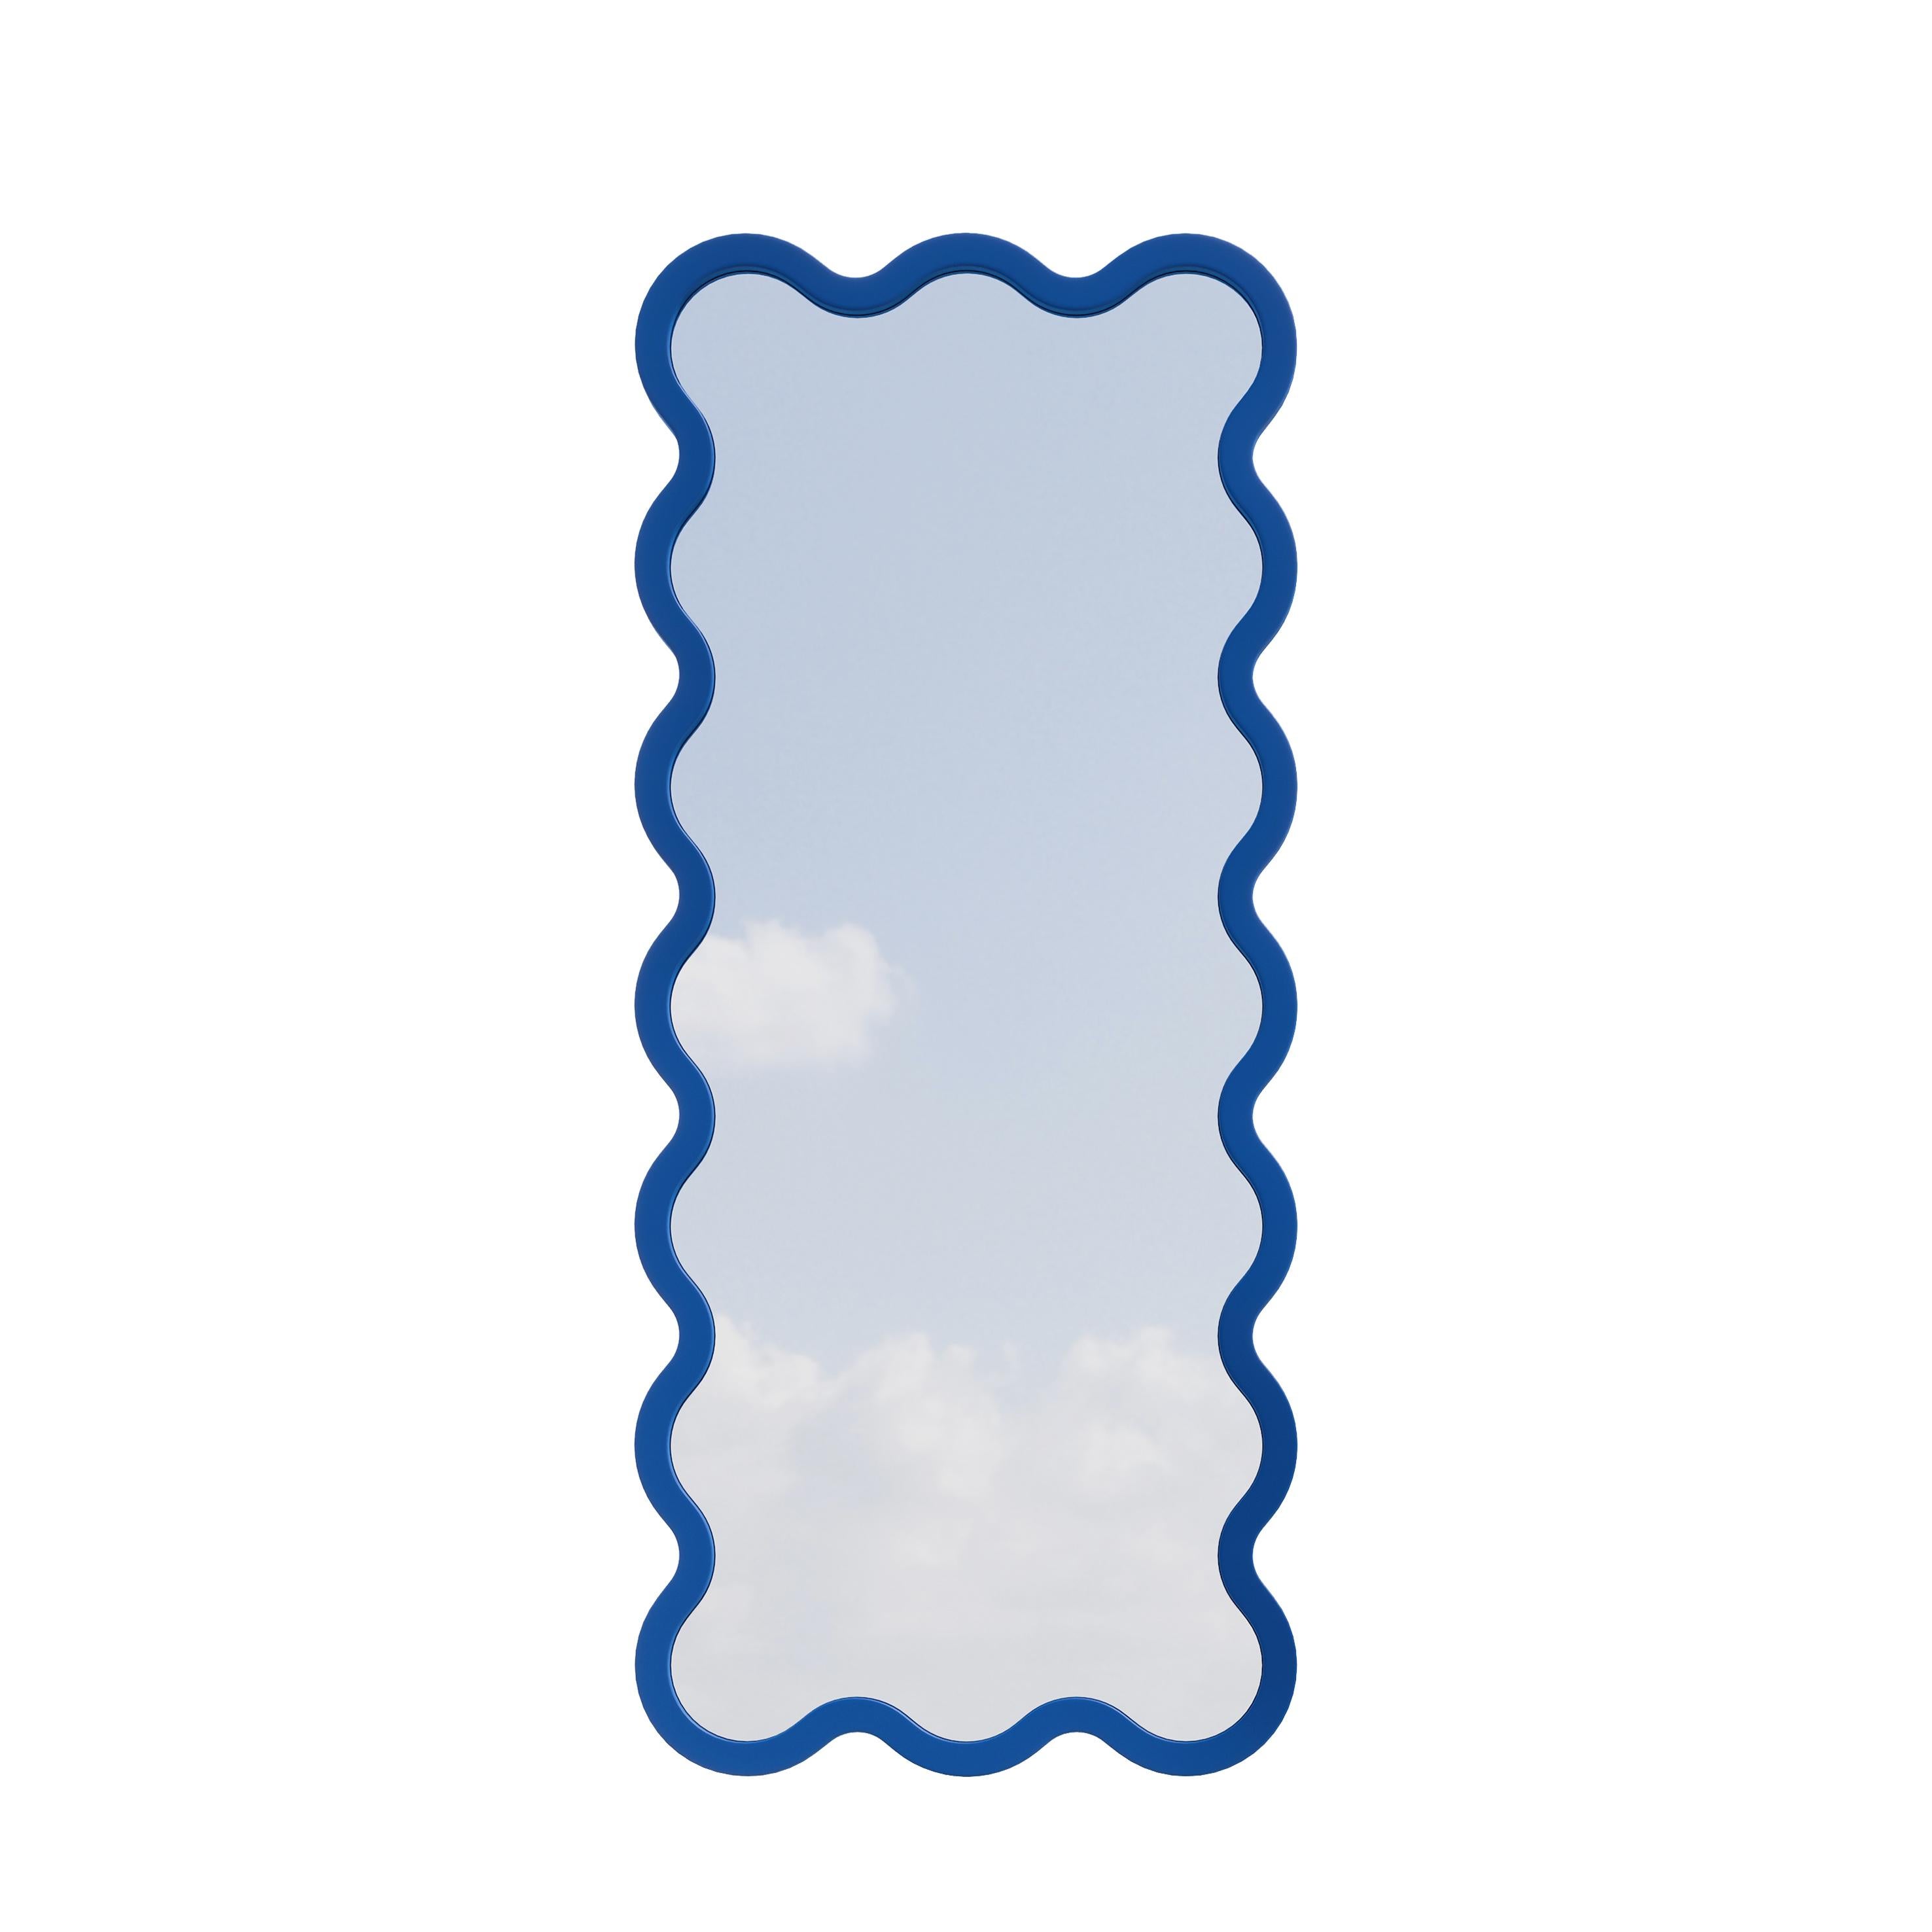 Contemporary Mirror 'Hvyli 16' by Oitoproducts, Blue Frame For Sale 1